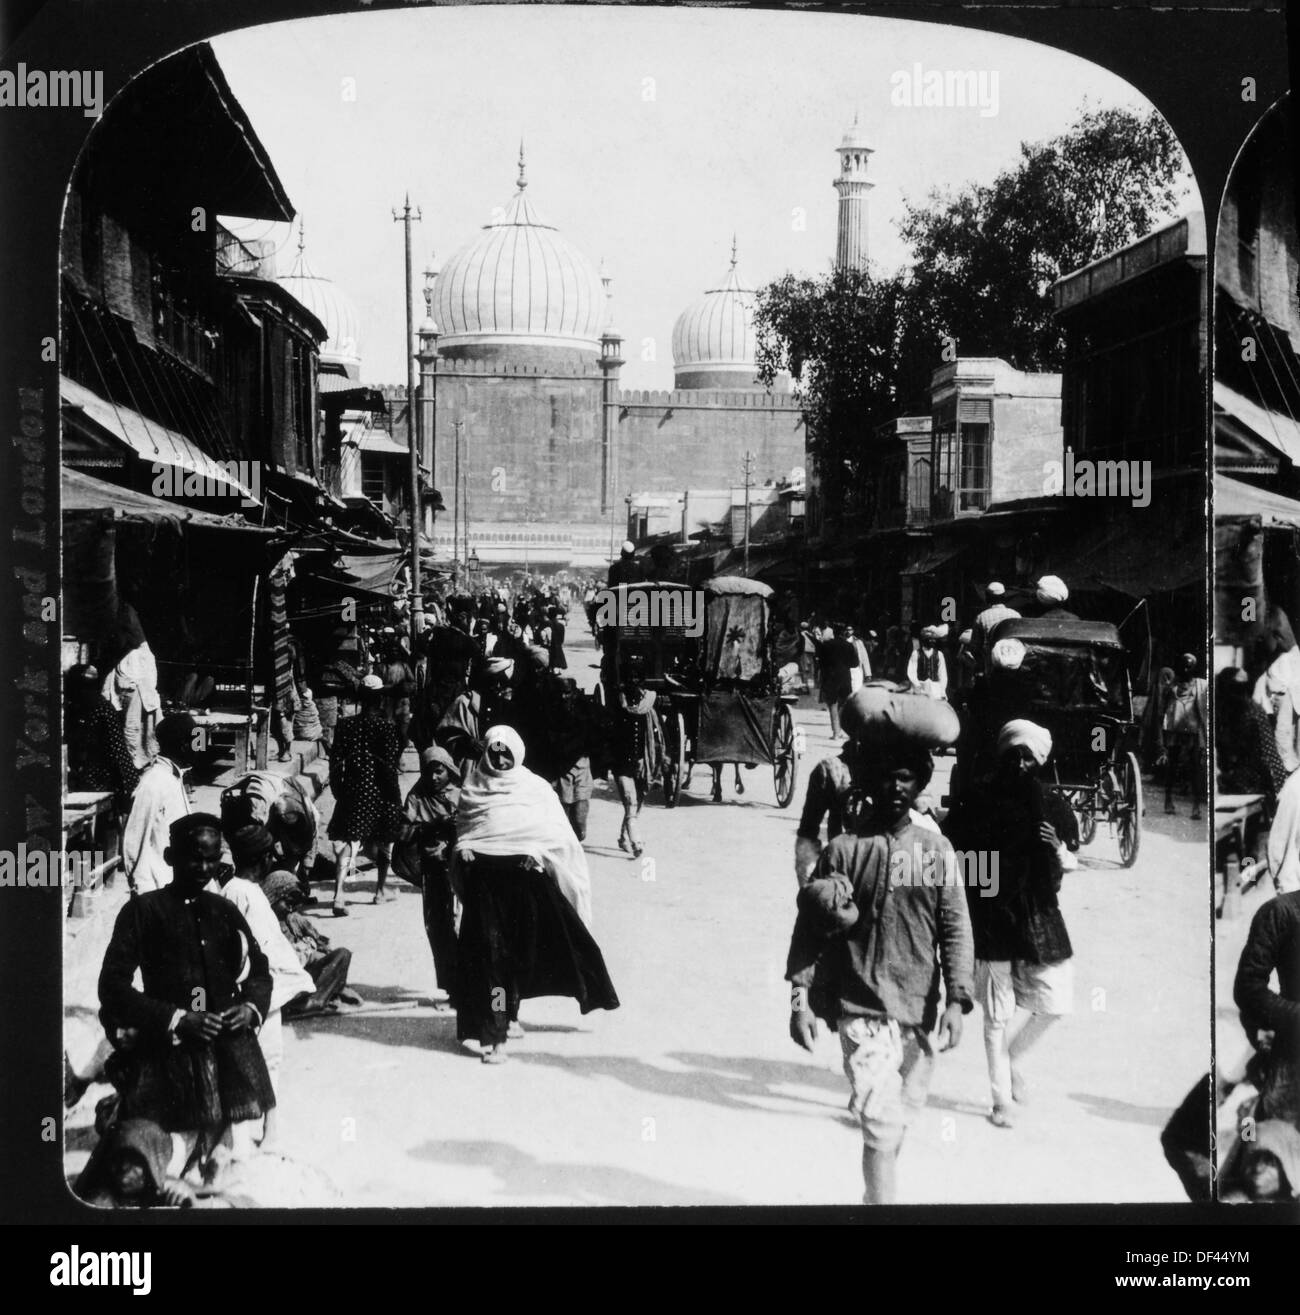 Busy Street Scene with Mosque in Background, Delphi, India, 1907 Stock Photo